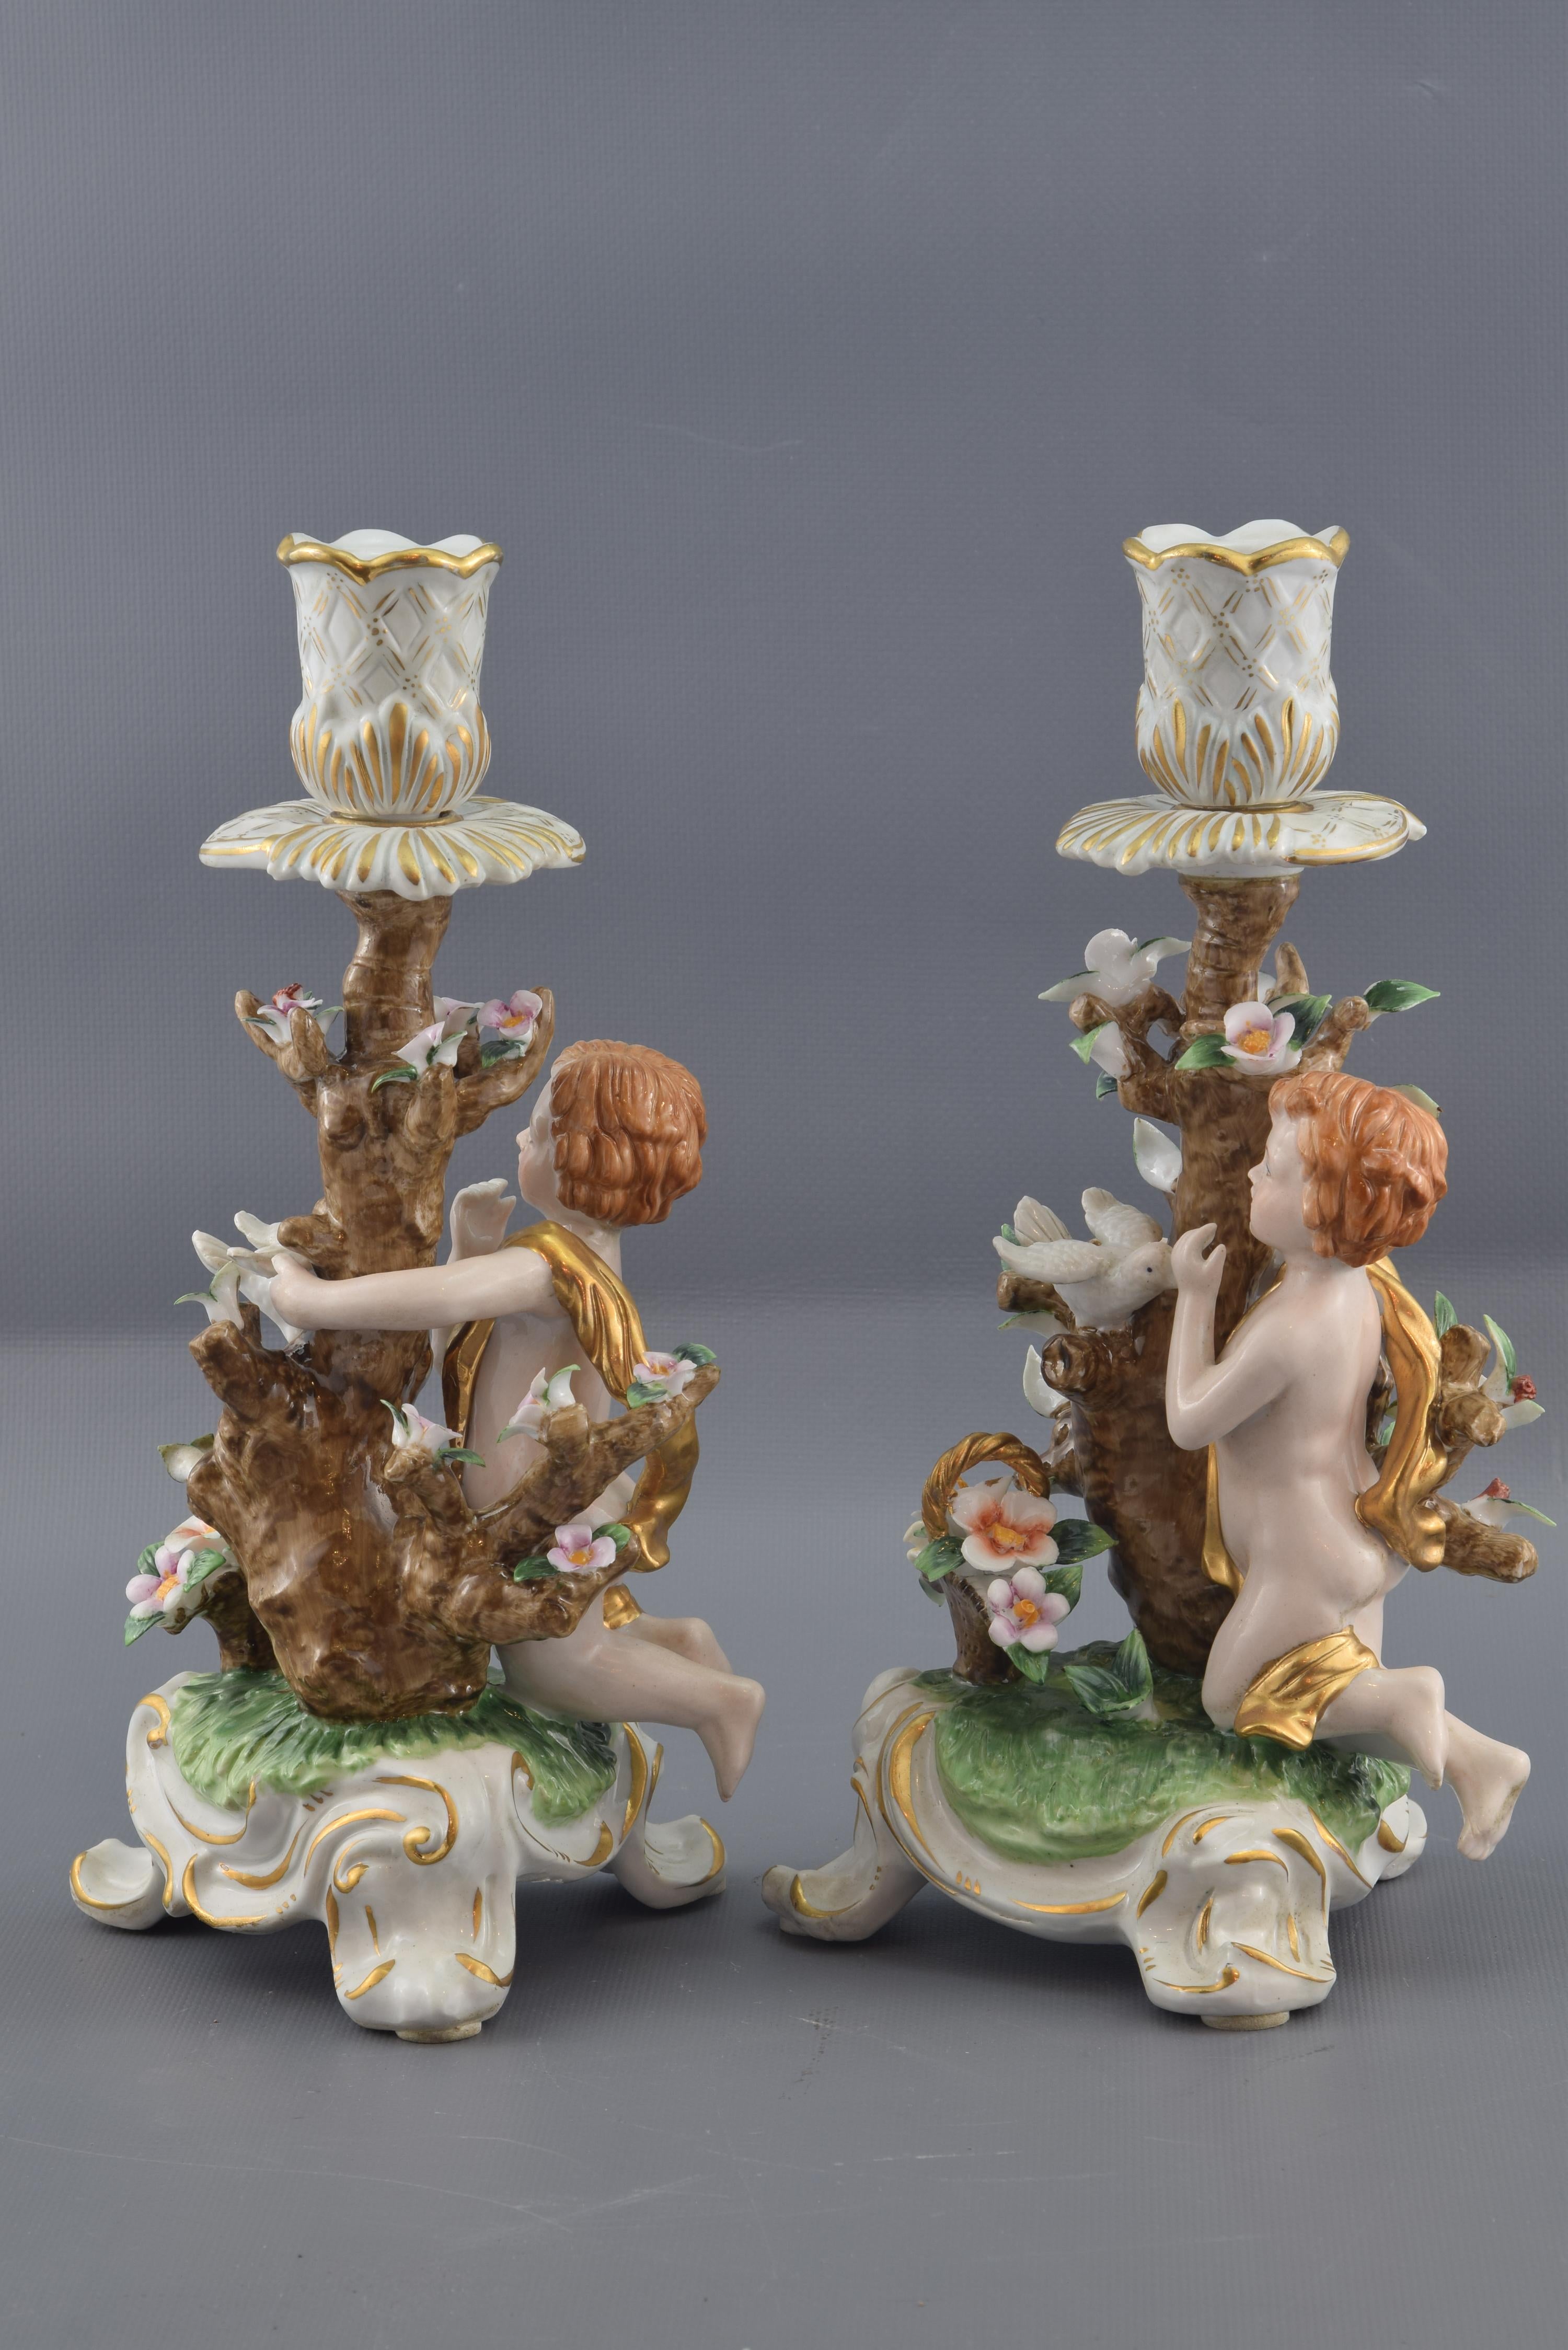 Rococo Pair of Porcelain Candleholders, after Models from Sèvres, France